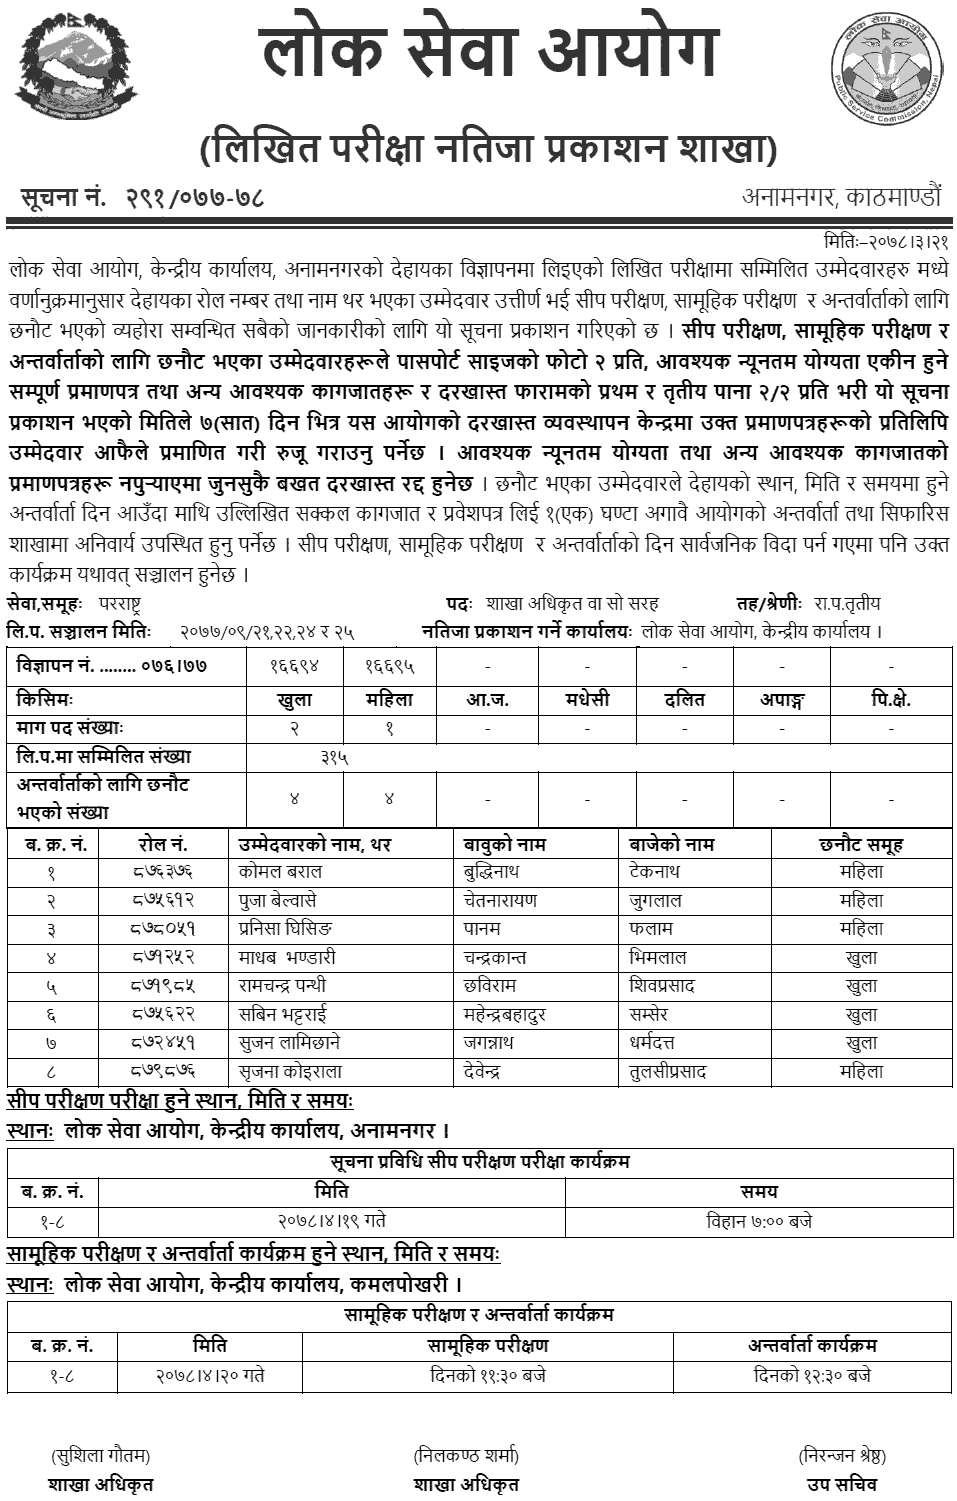 Lok Sewa Aayog Published Written Exam Result of Section Officer (Foreign Affair)